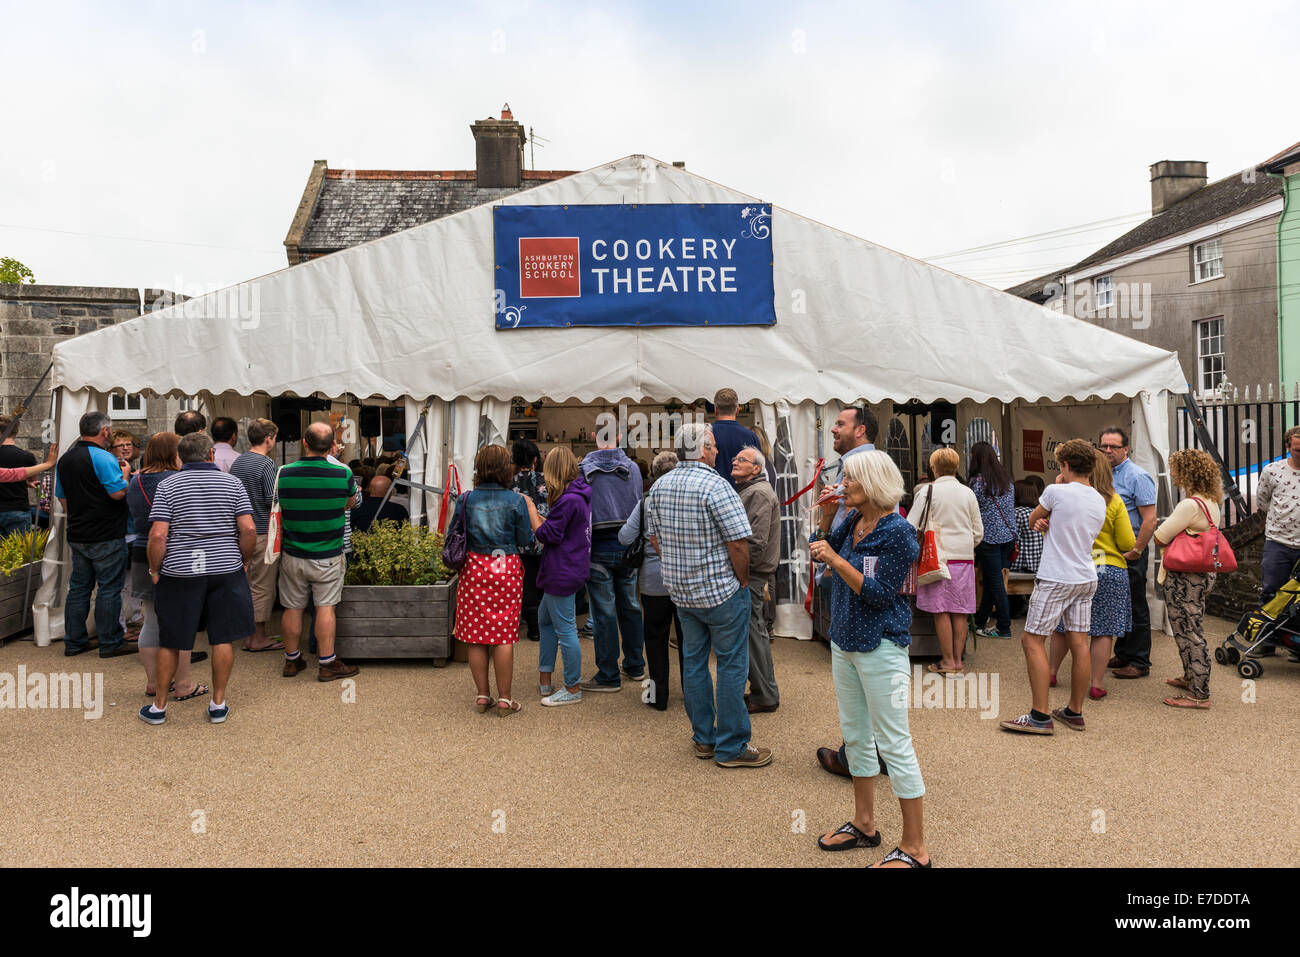 Ashburton Food & Drink Festival and the Ashburton Cookery Theatre marquee with people waiting outside to go in. Stock Photo